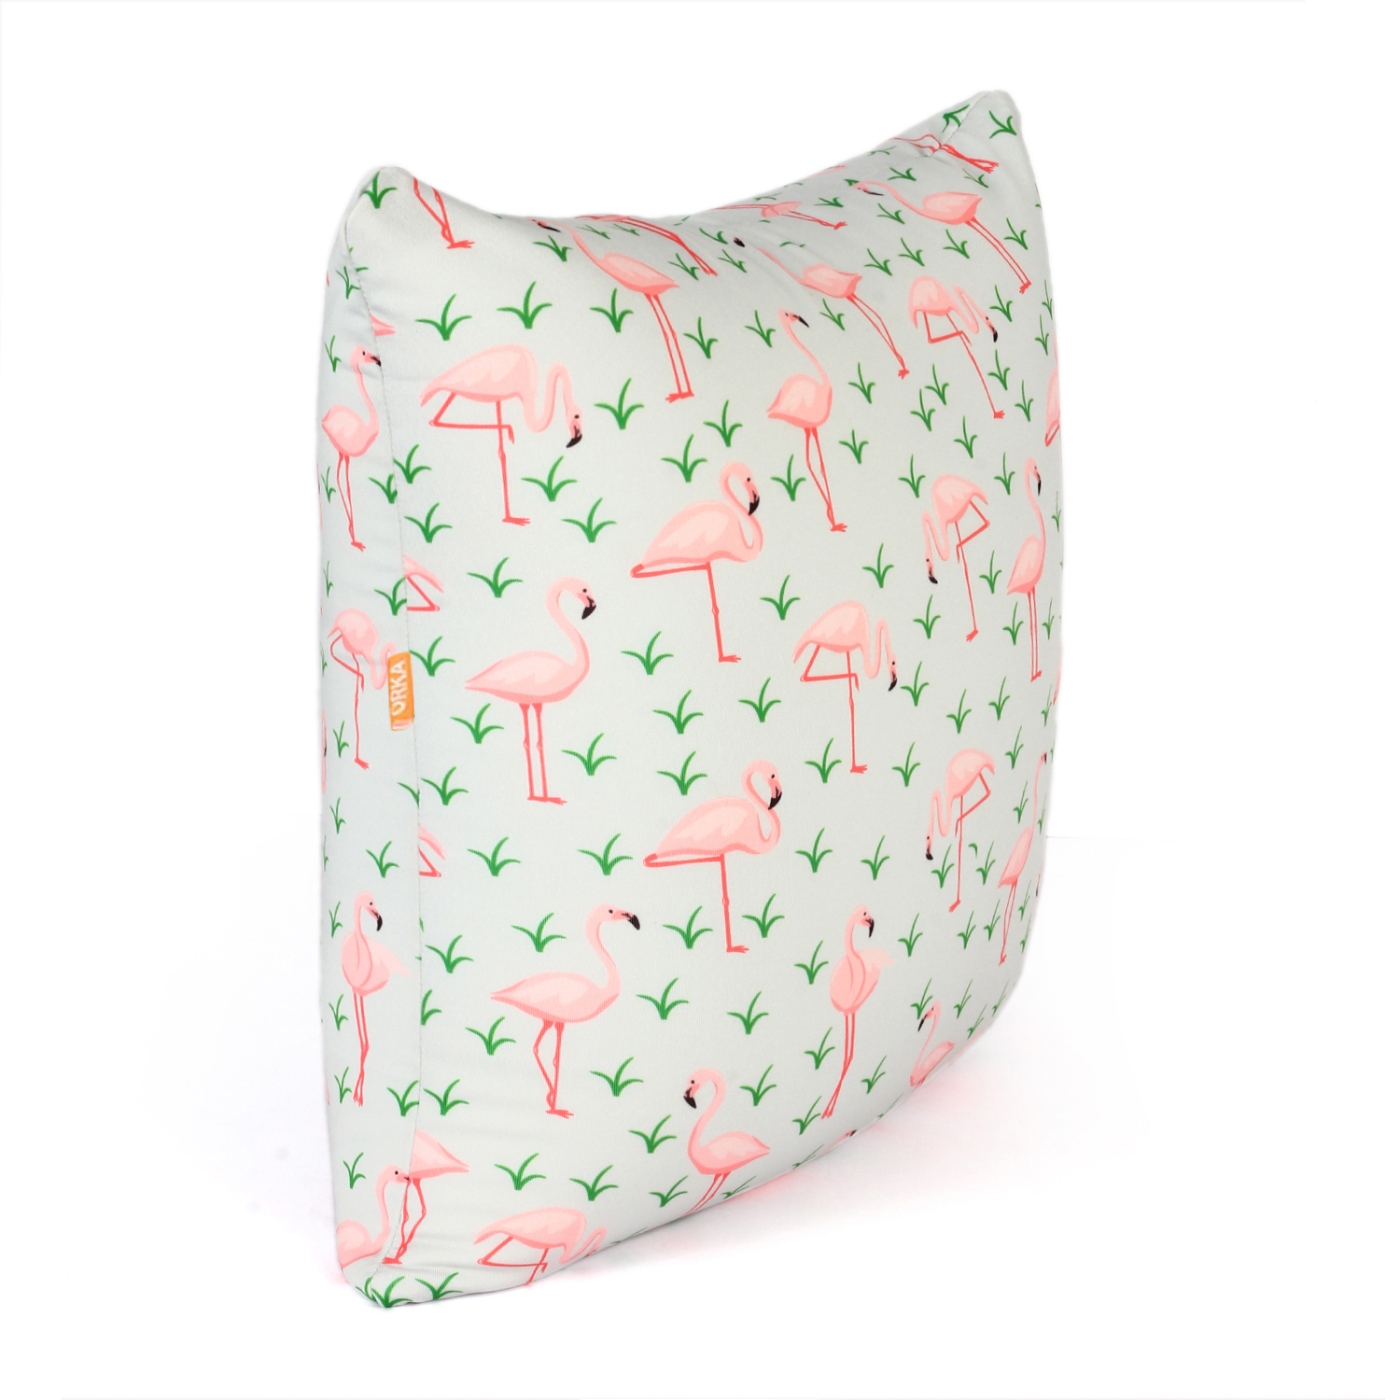 ORKA Digital Printed Spandex Filled With Microbeads Square Cushion 14 X 14 Inch - Pink, Green  